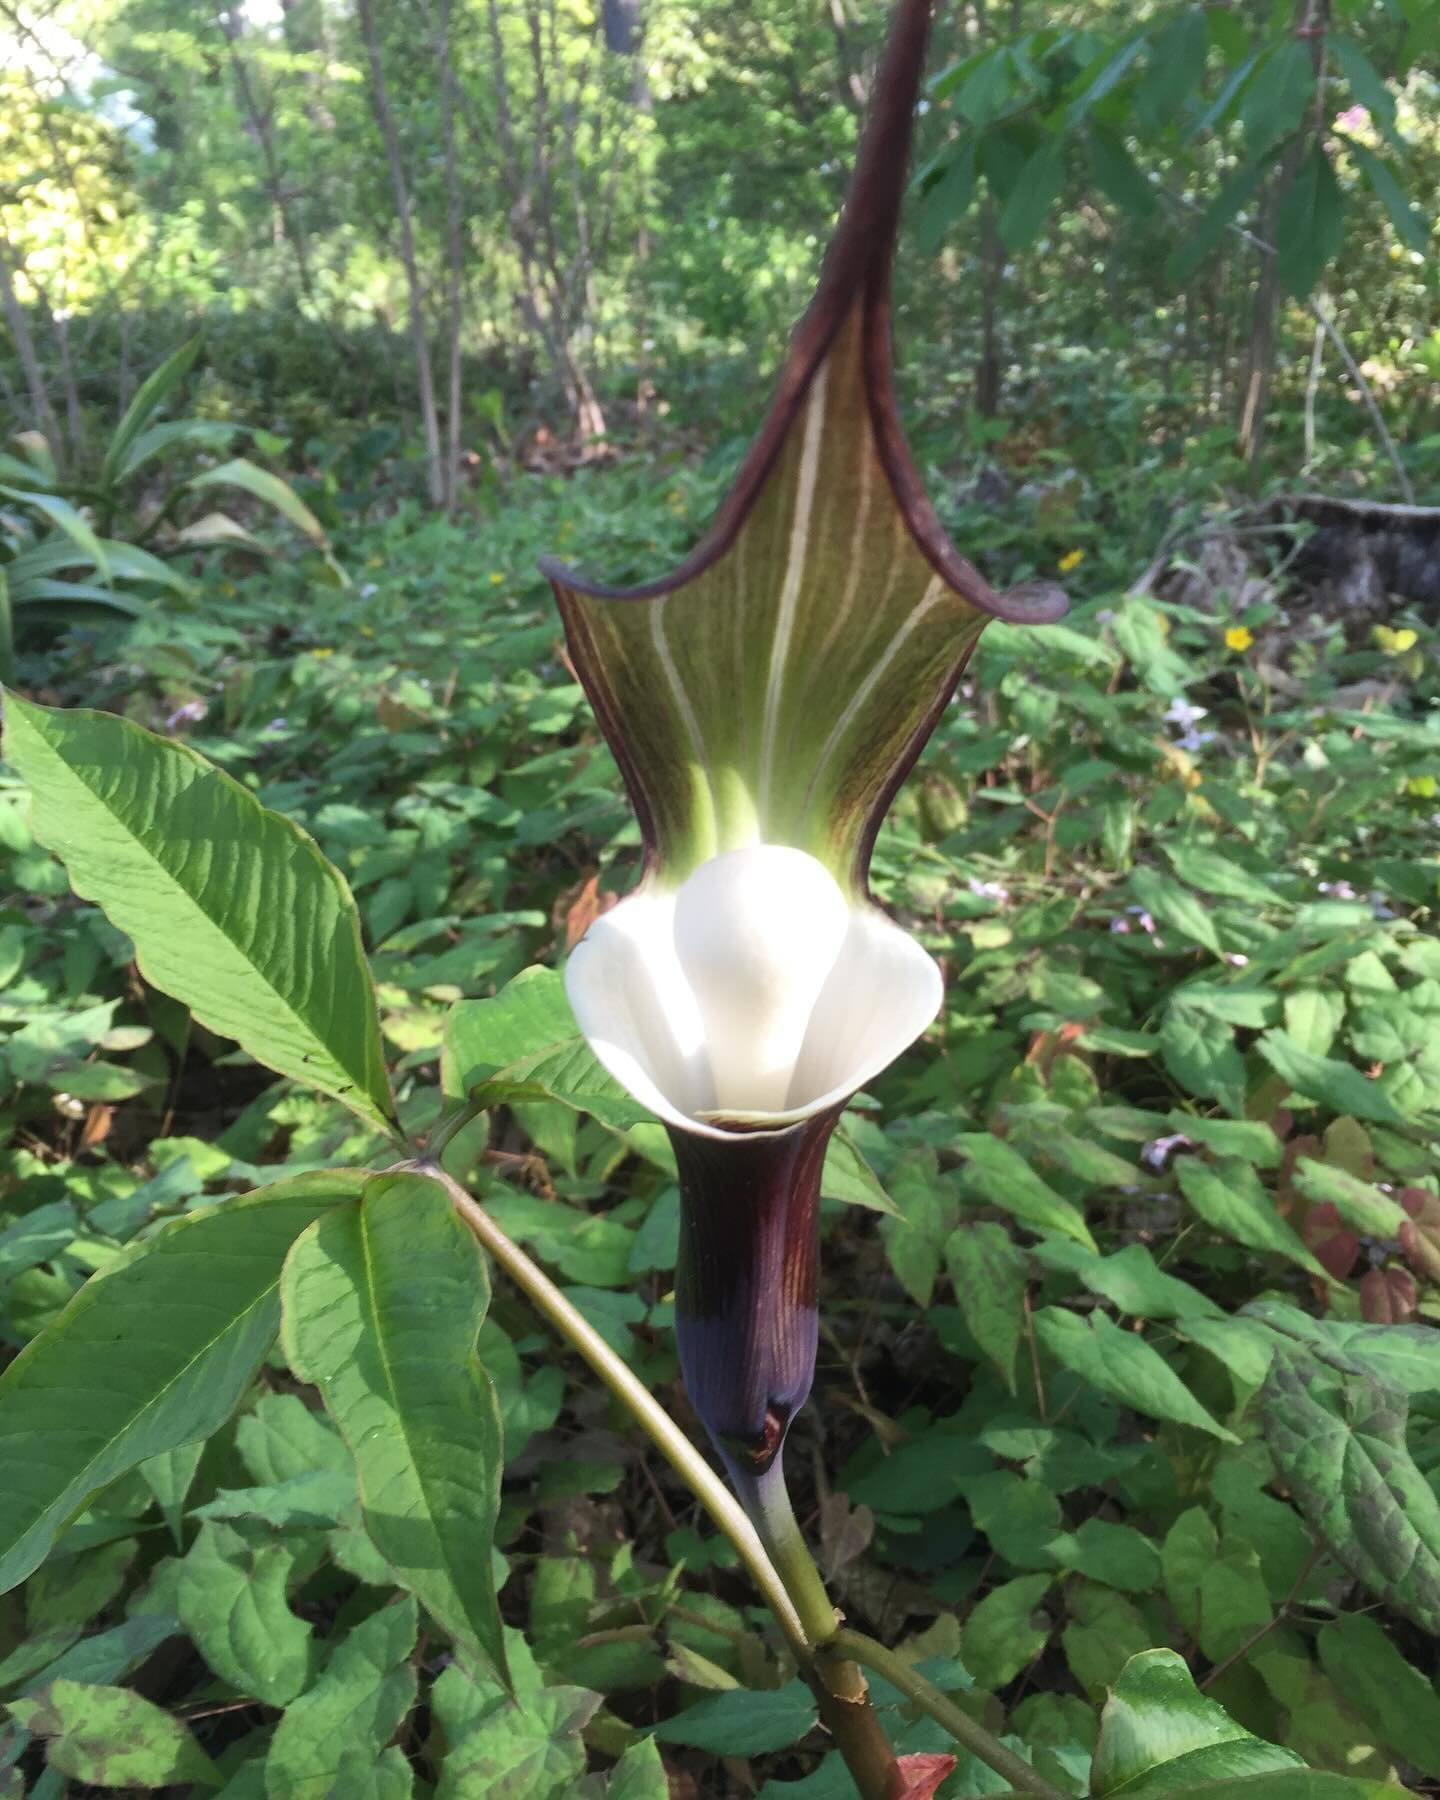 We stumbled upon this beautiful Jack-in-the-Pulpit (Arisaema triphyllum) nestled in our client&rsquo;s property during a routine check-up. Nature&rsquo;s wonders never cease to amaze us! Our tree care services ensure your property remains a haven for